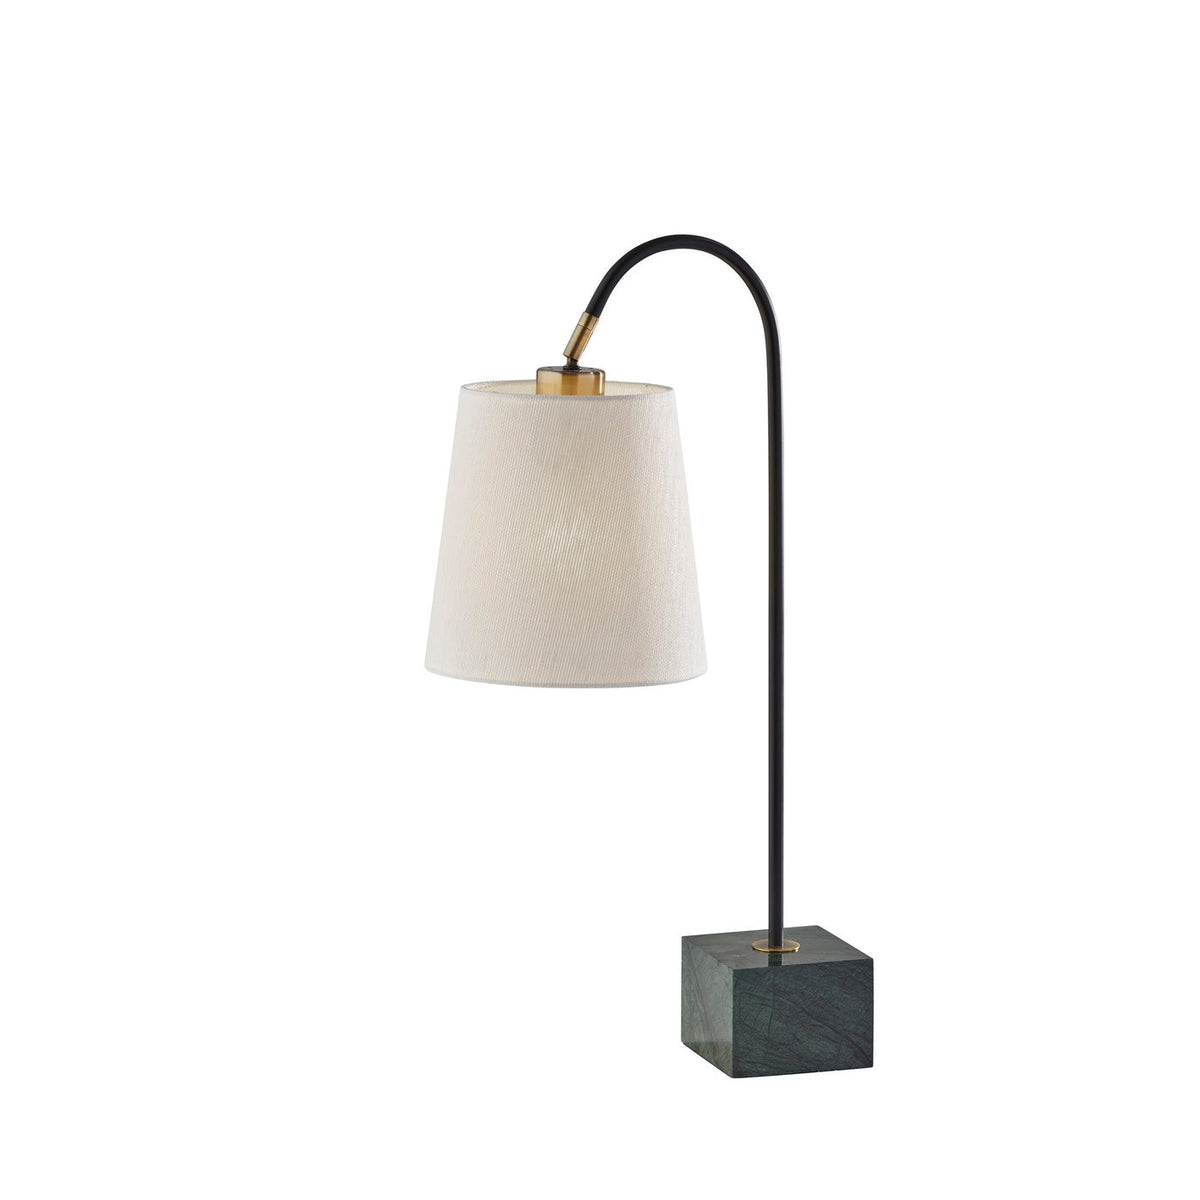 Adesso Home - 3398-01 - Table Lamp - Hanover - Black W. Antique Brass Accent